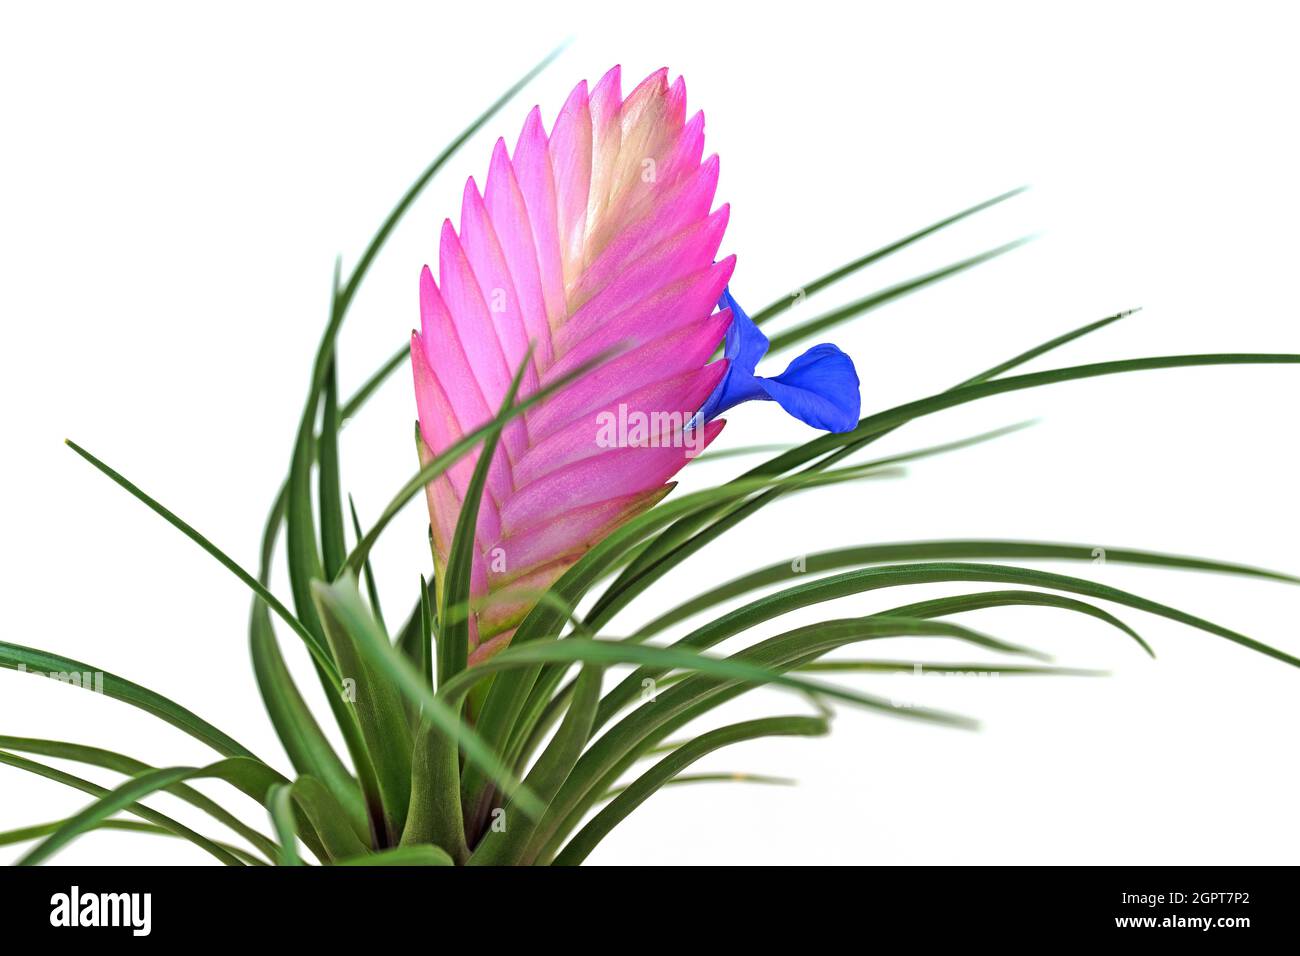 Blooming tillandsia in front of white background Stock Photo